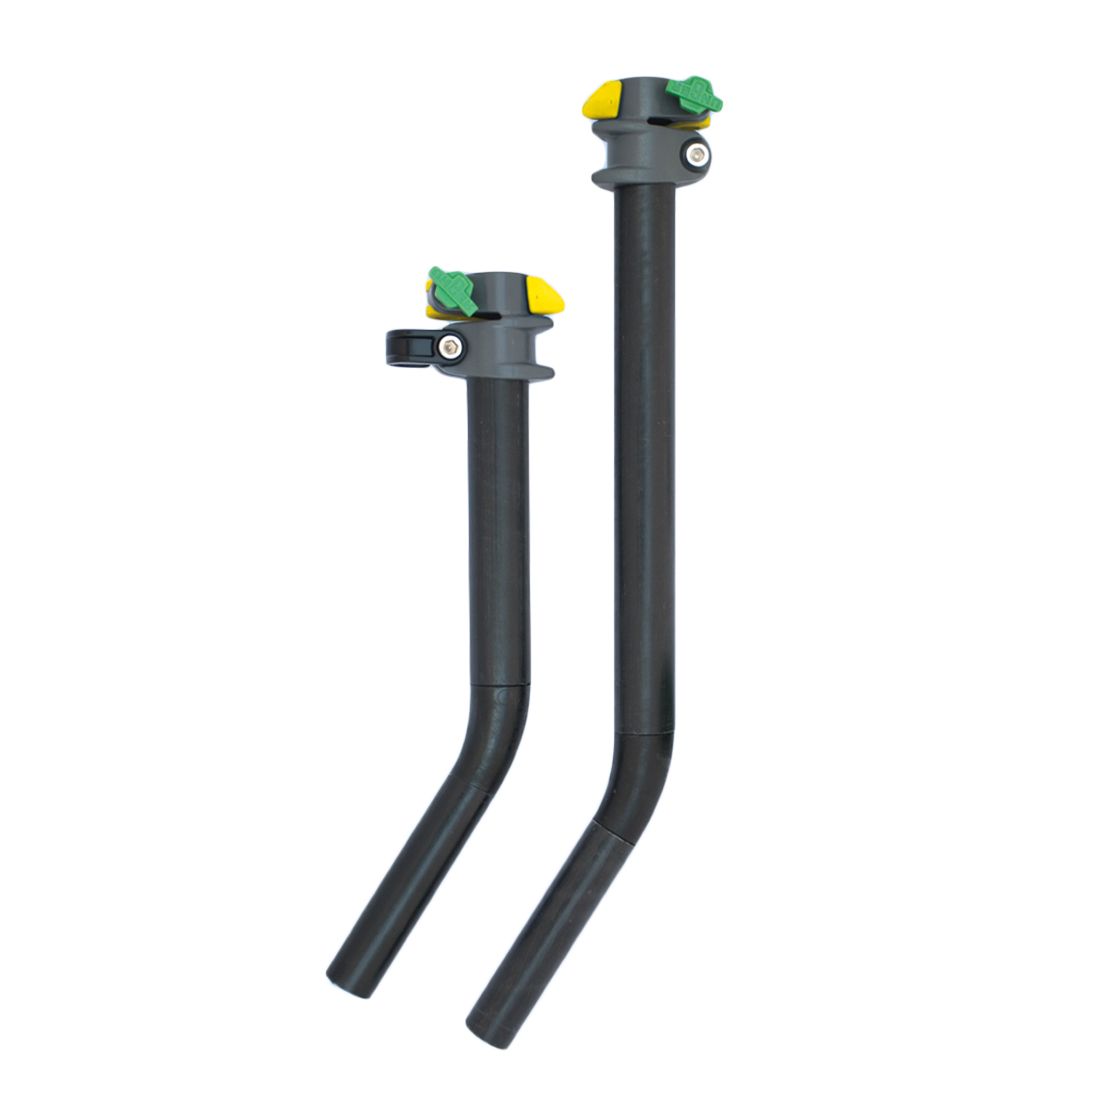 Unger nLite Gooseneck - 8 Inch (Left) and 11 Inch (Right) - Side by Side View